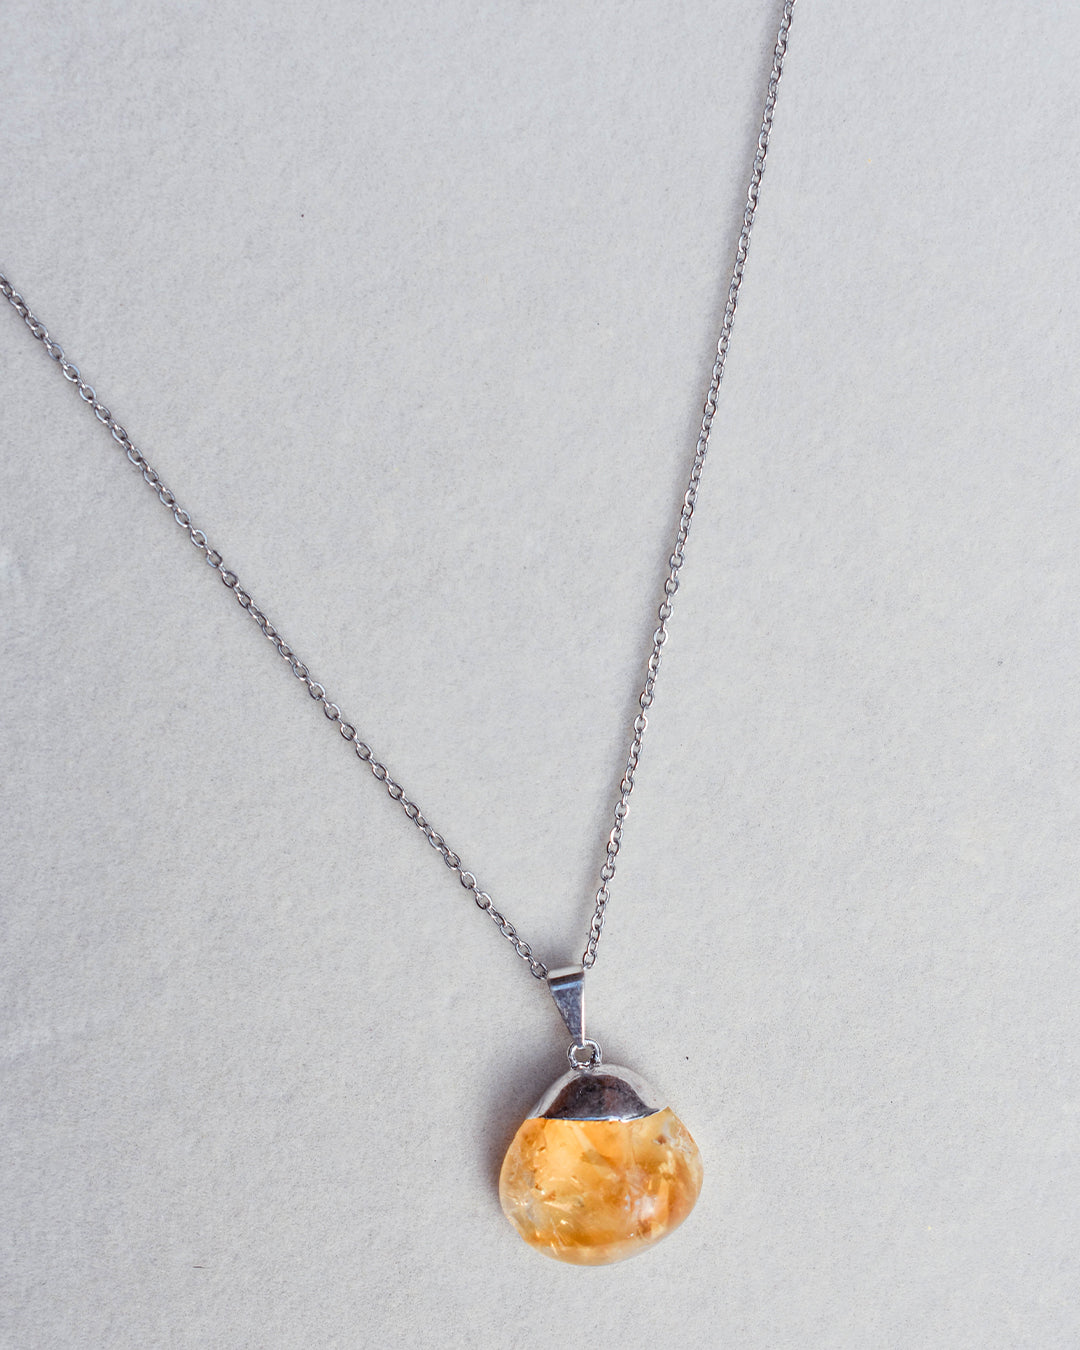 Stainless Steel chain with Citrine Crystal pendant